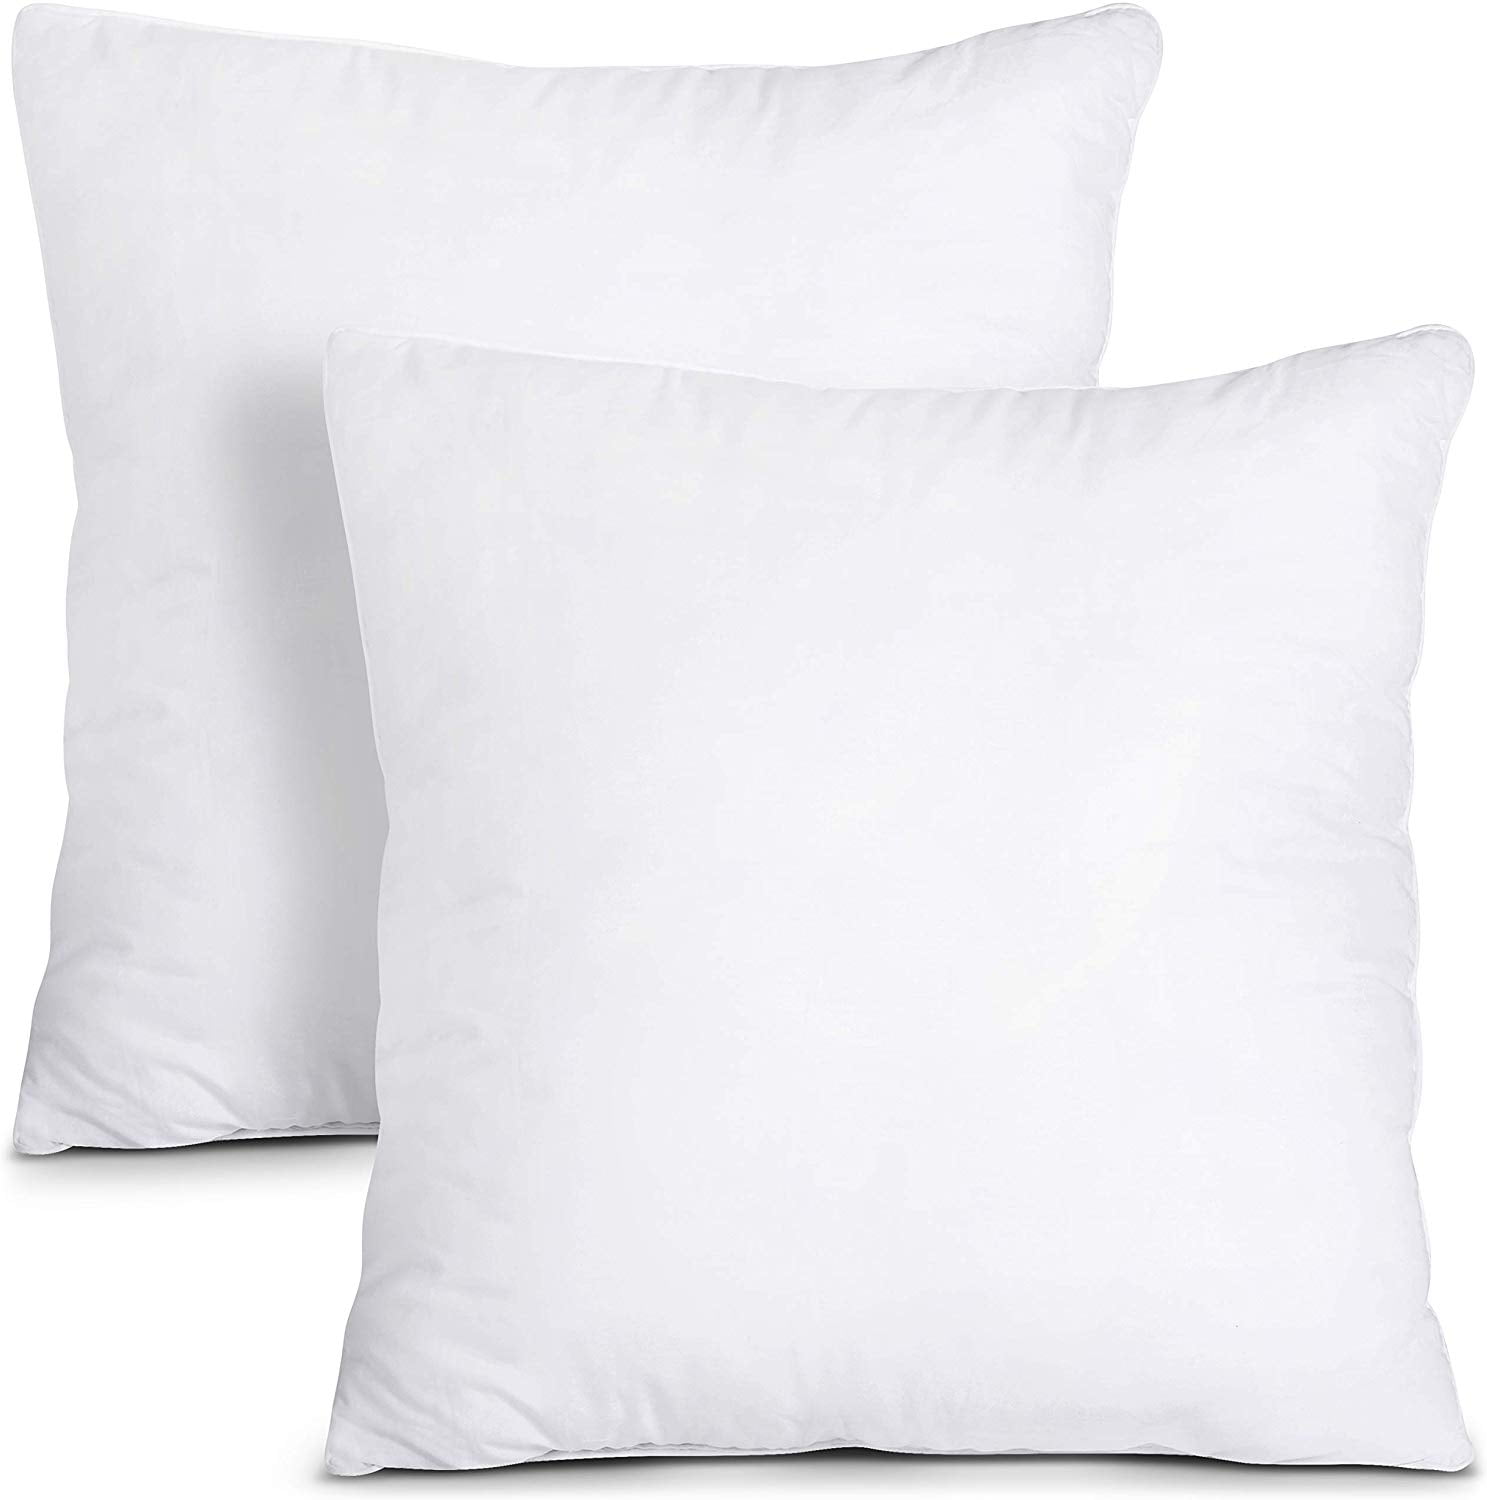 KAKABELL 18x18 Pillows Insert,Throw Pillows Insert (Pack of 2, White), 100%  Cotton Cover, Down Alternative Bed and Couch Pillows, Luxury Soft and Cozy